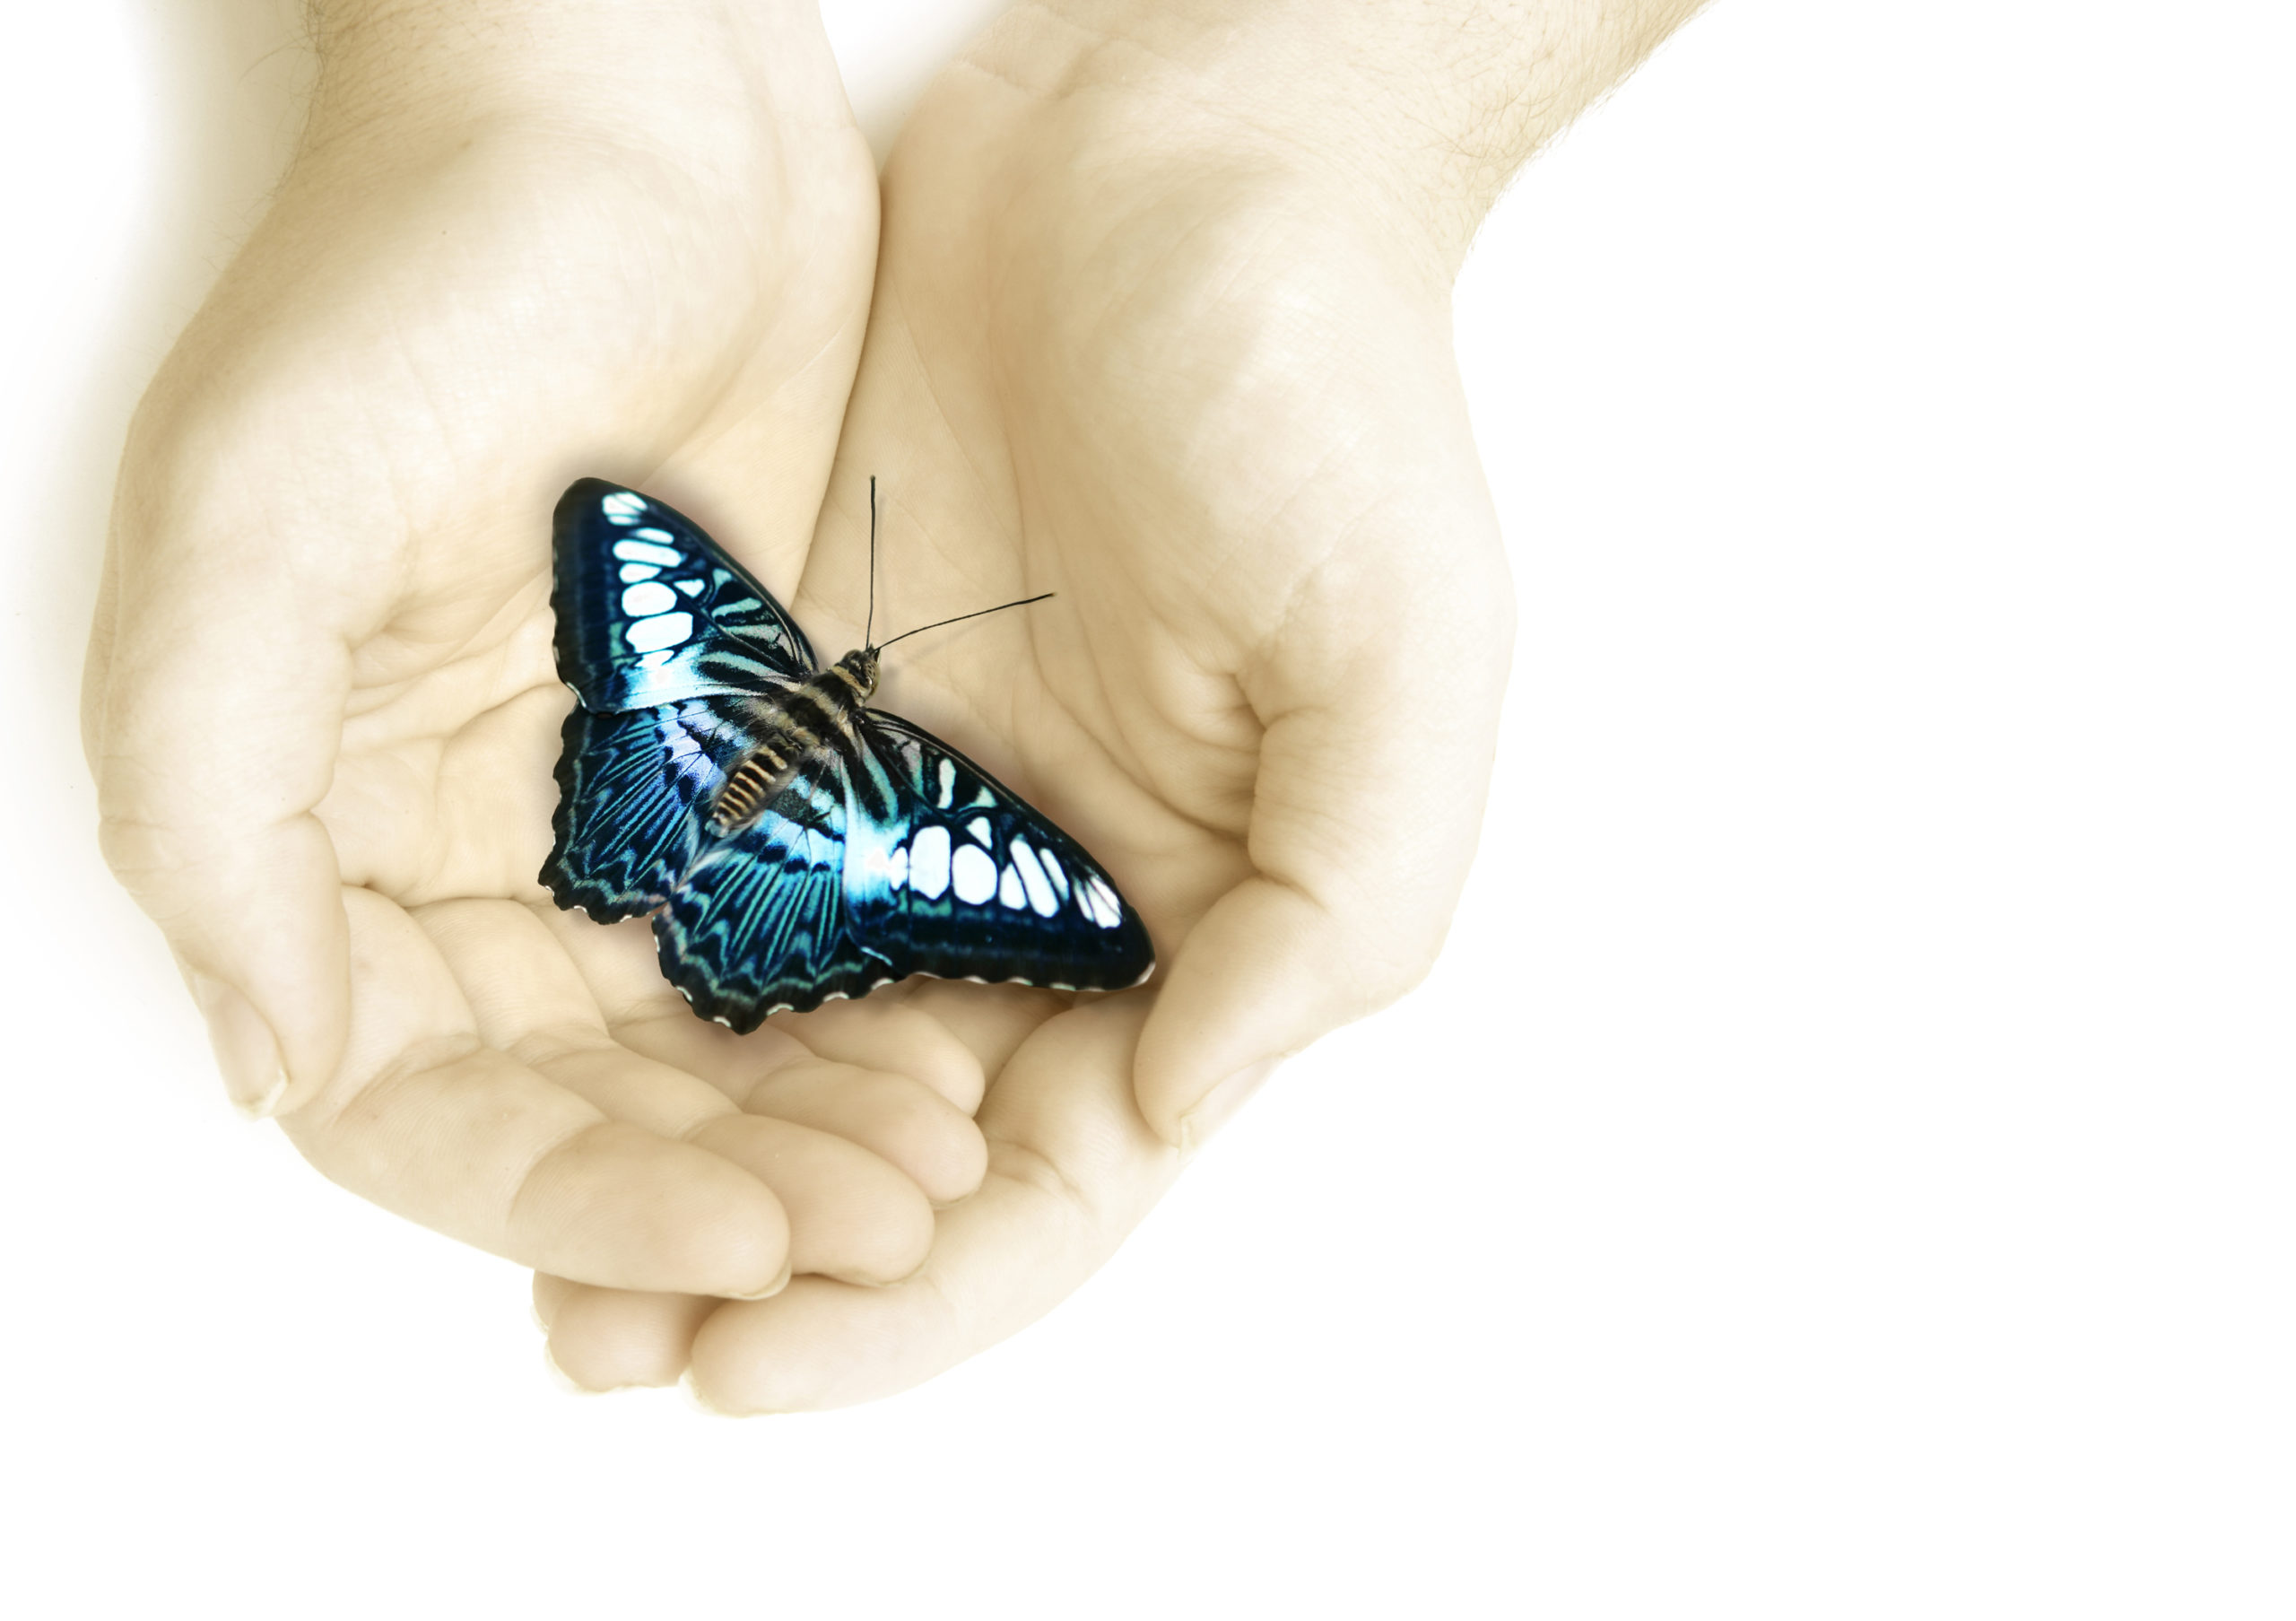 Two caucasian hands cupped together holding a black blue and white butterfly